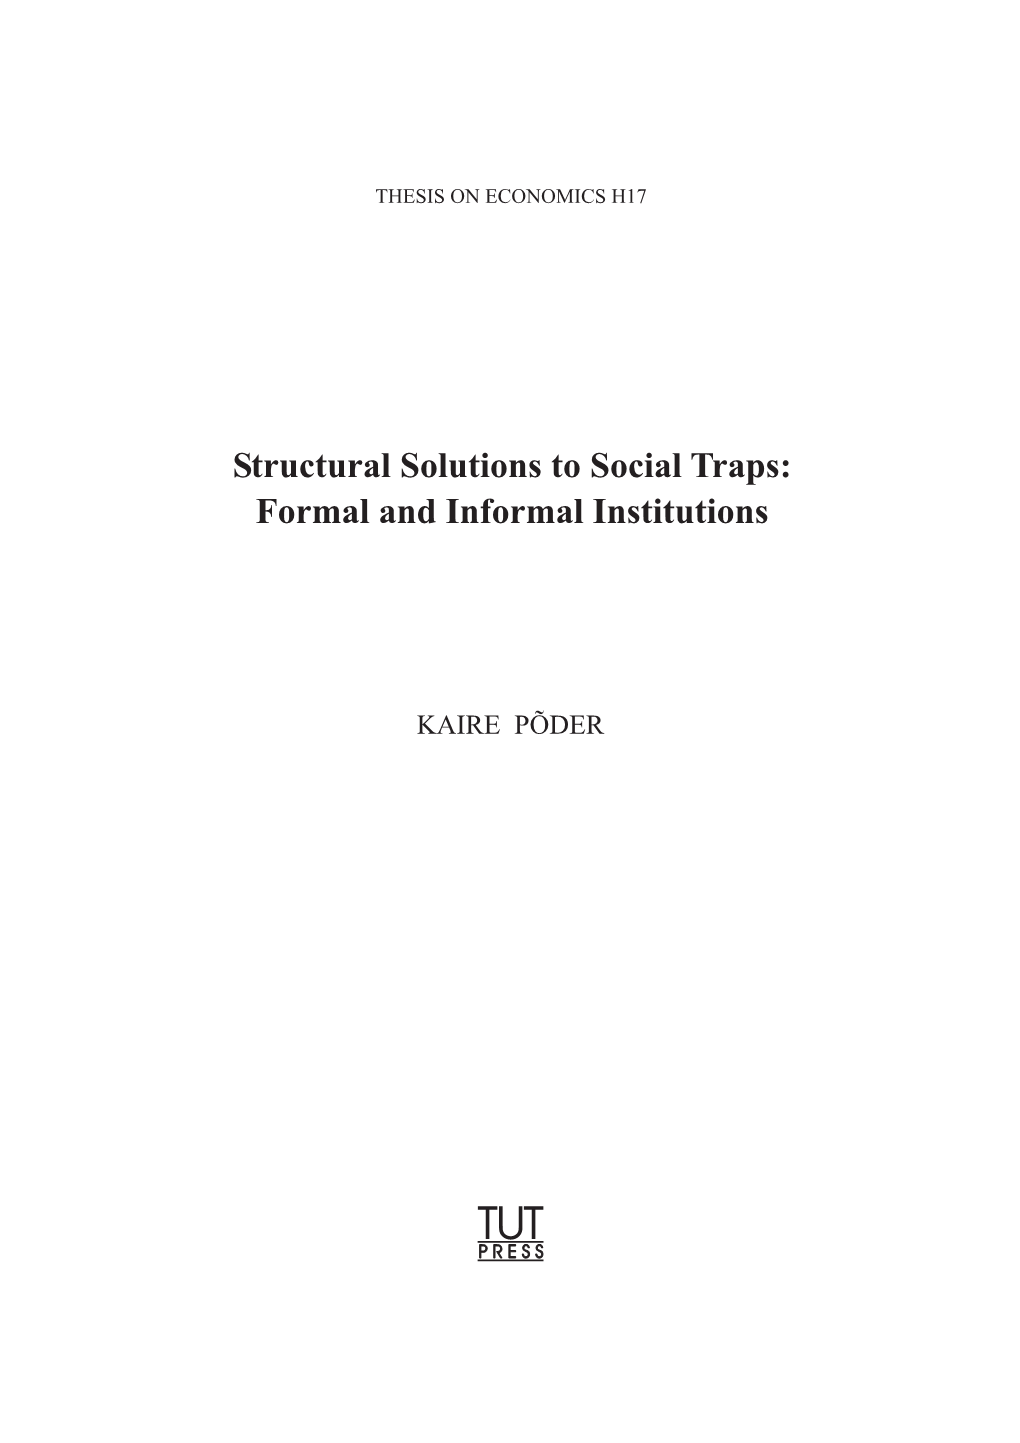 Structural Solutions to Social Traps: Formal and Informal Institutions